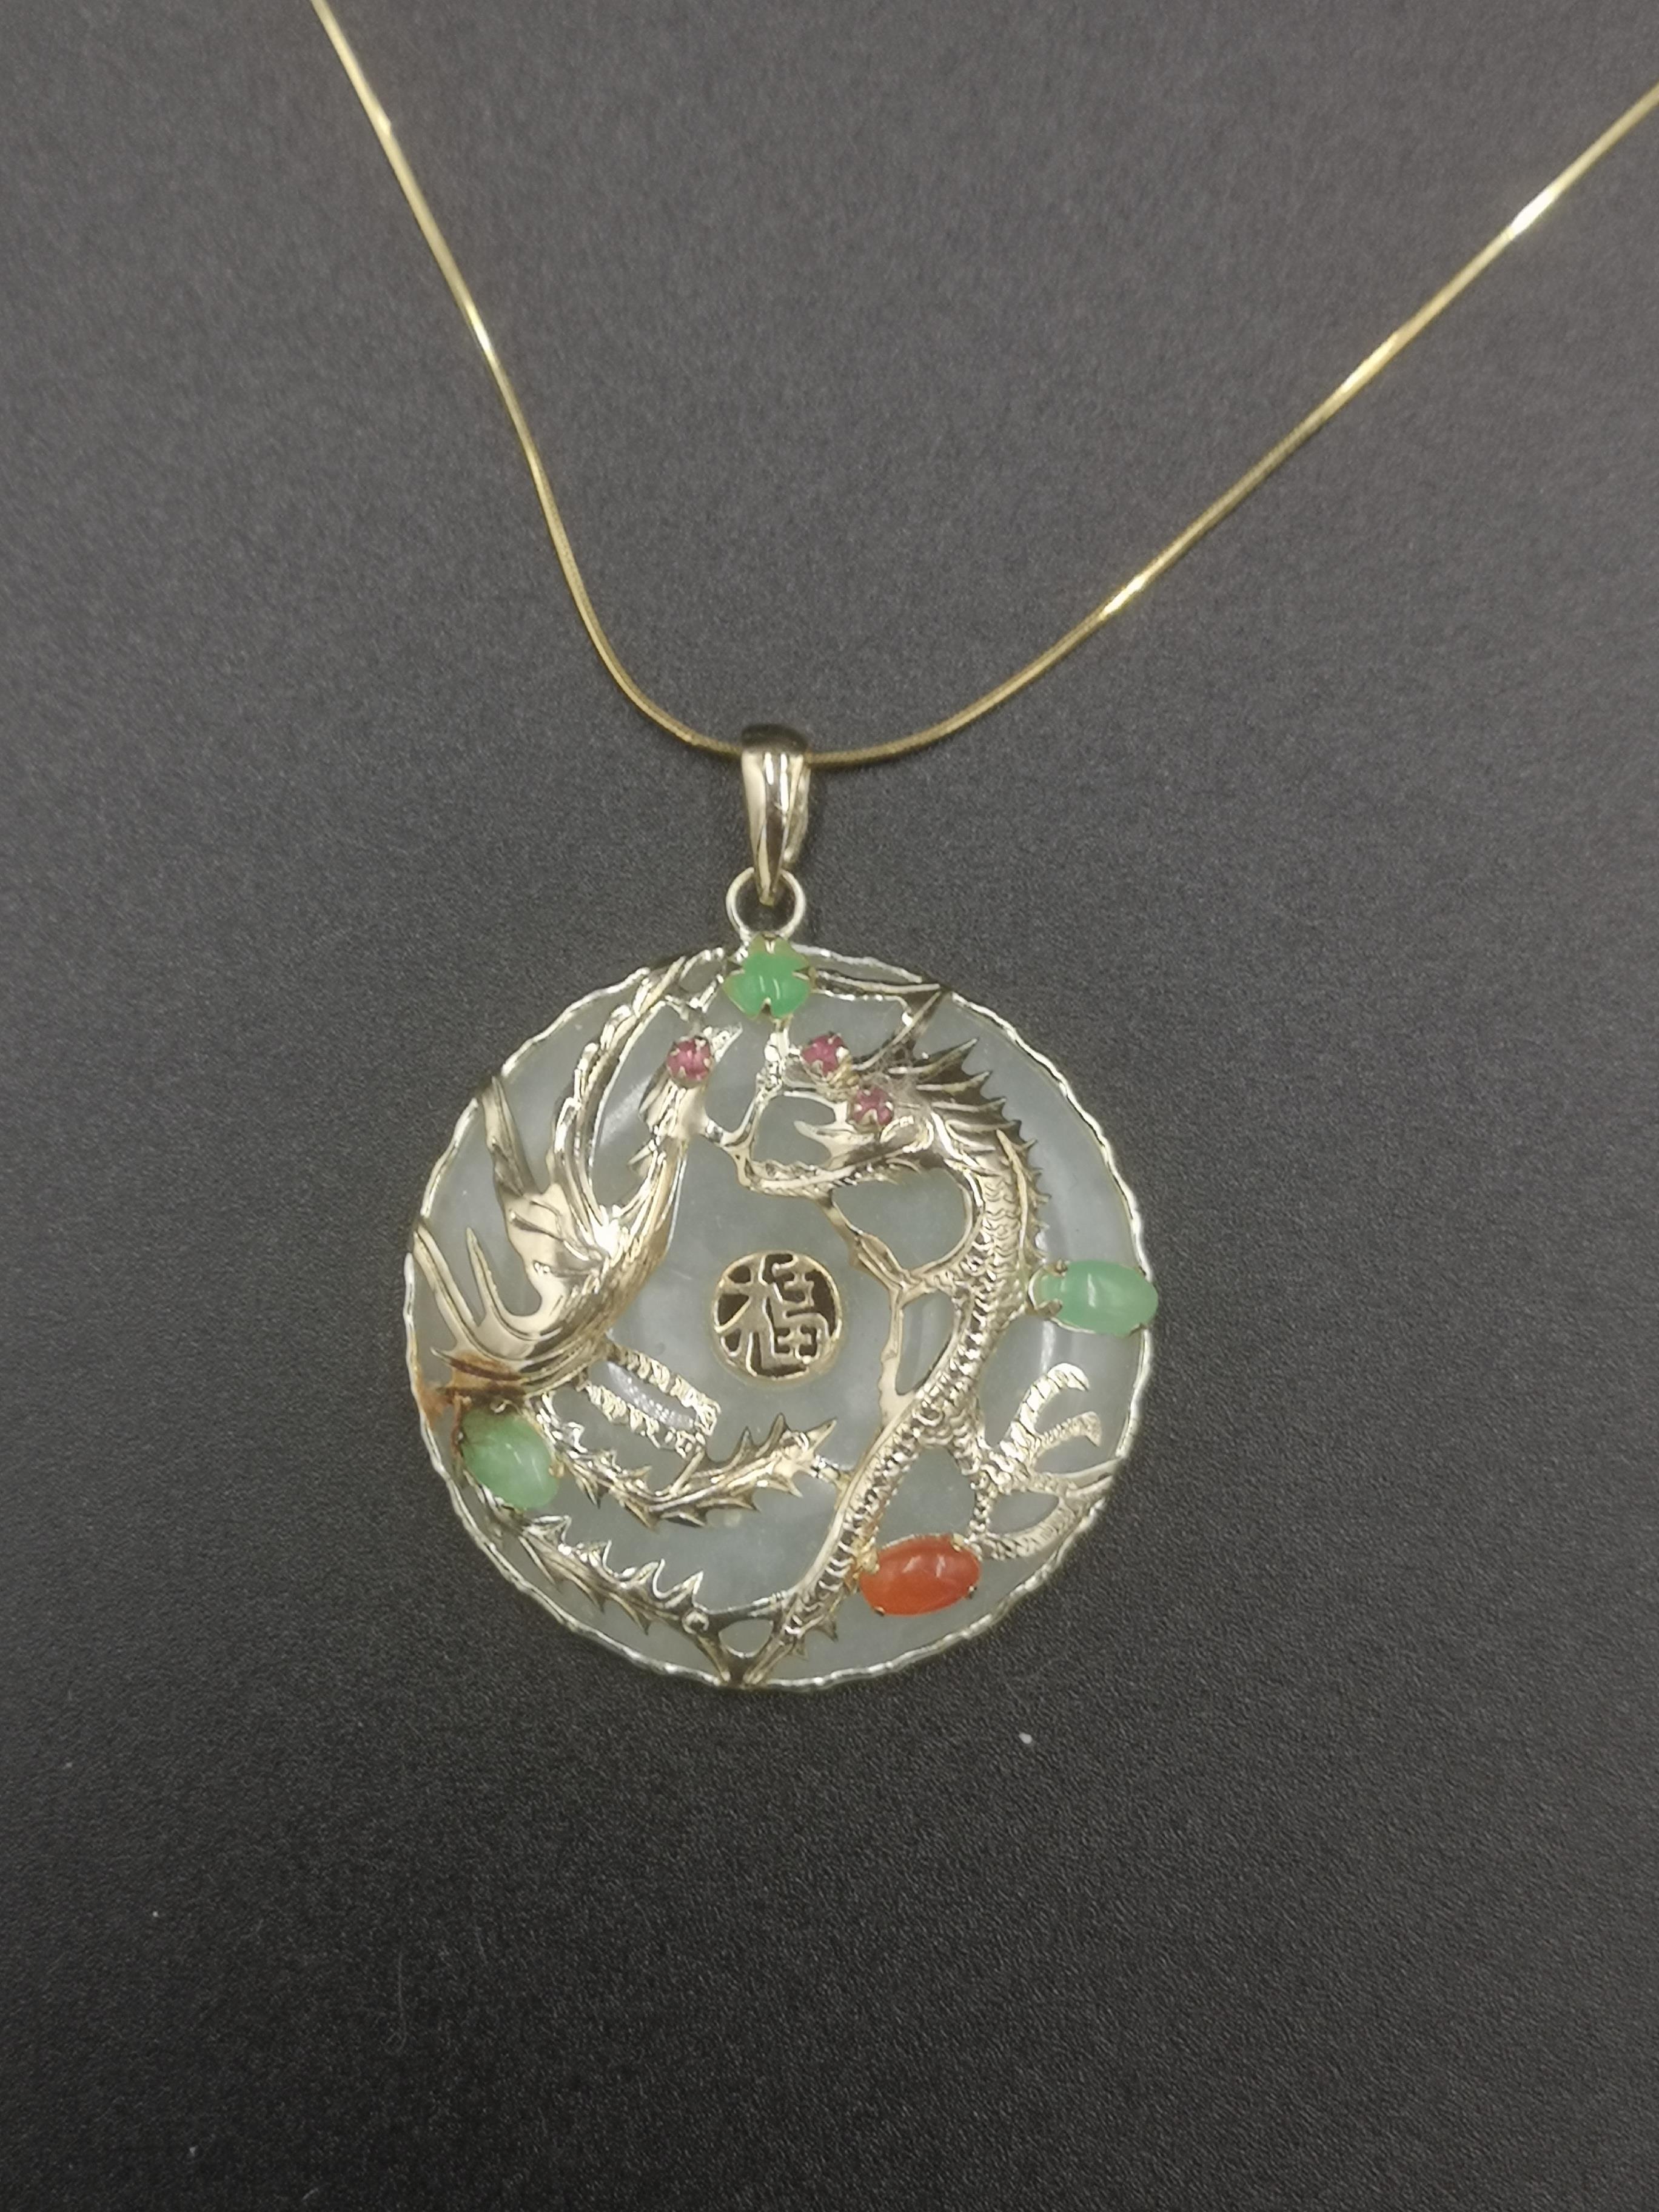 14ct gold and jade pendant - Image 2 of 4